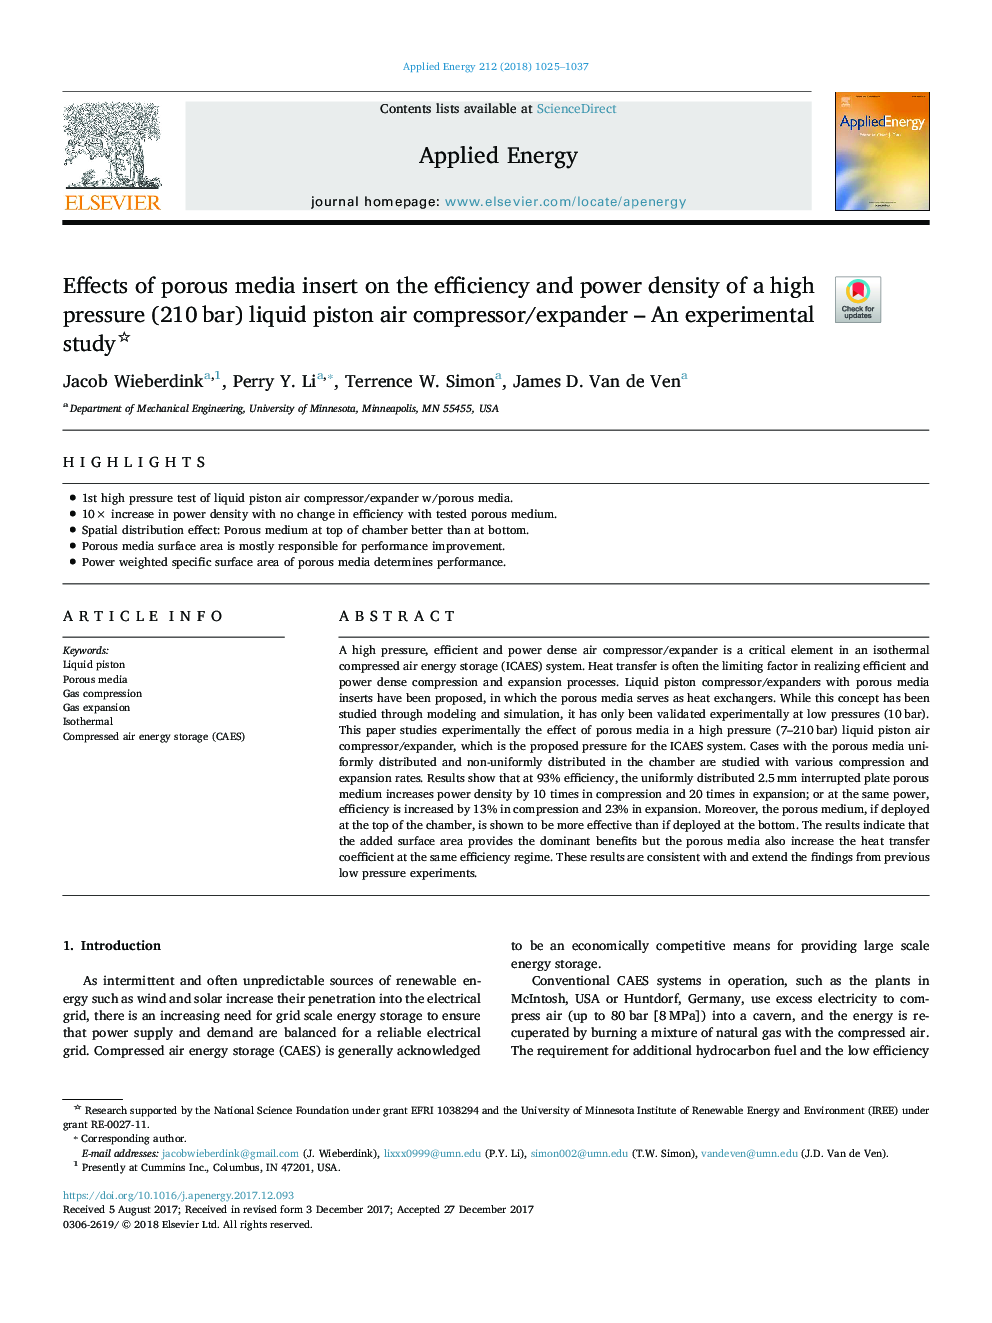 Effects of porous media insert on the efficiency and power density of a high pressure (210â¯bar) liquid piston air compressor/expander - An experimental study